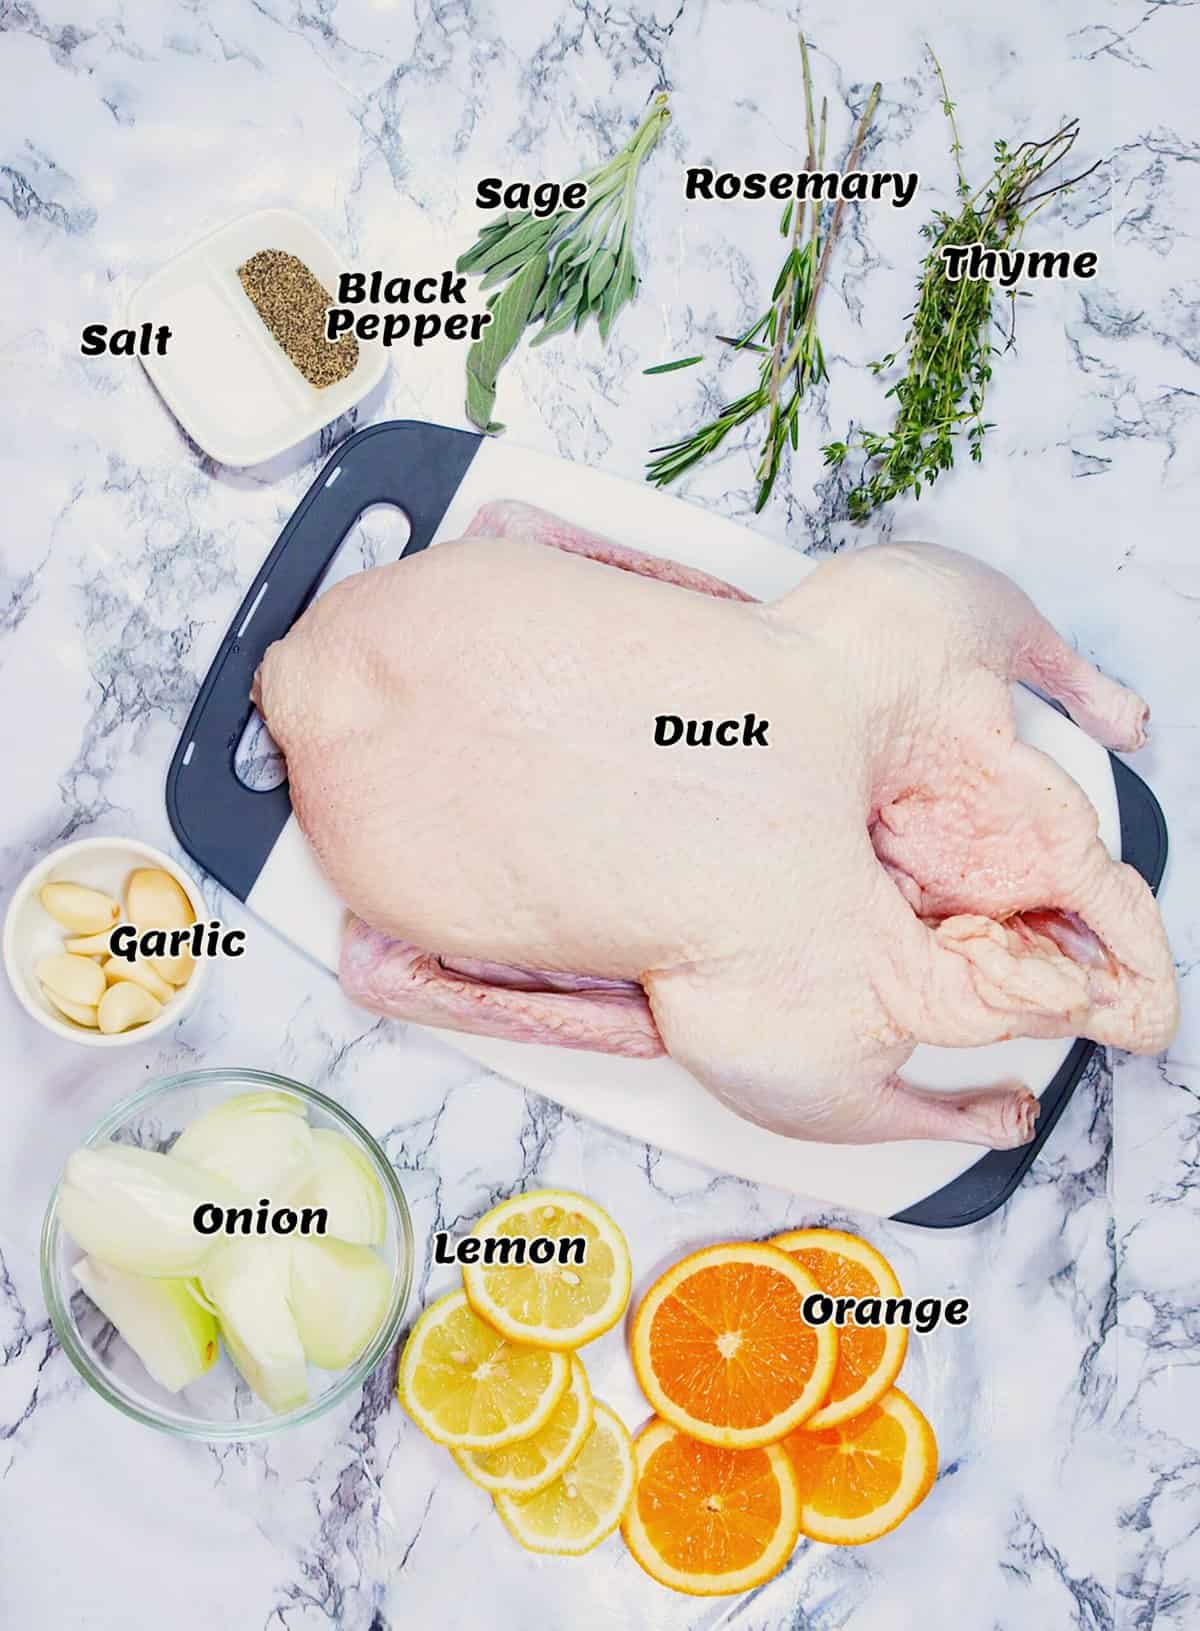 Recipe Ingredients for a delicious holiday dinner